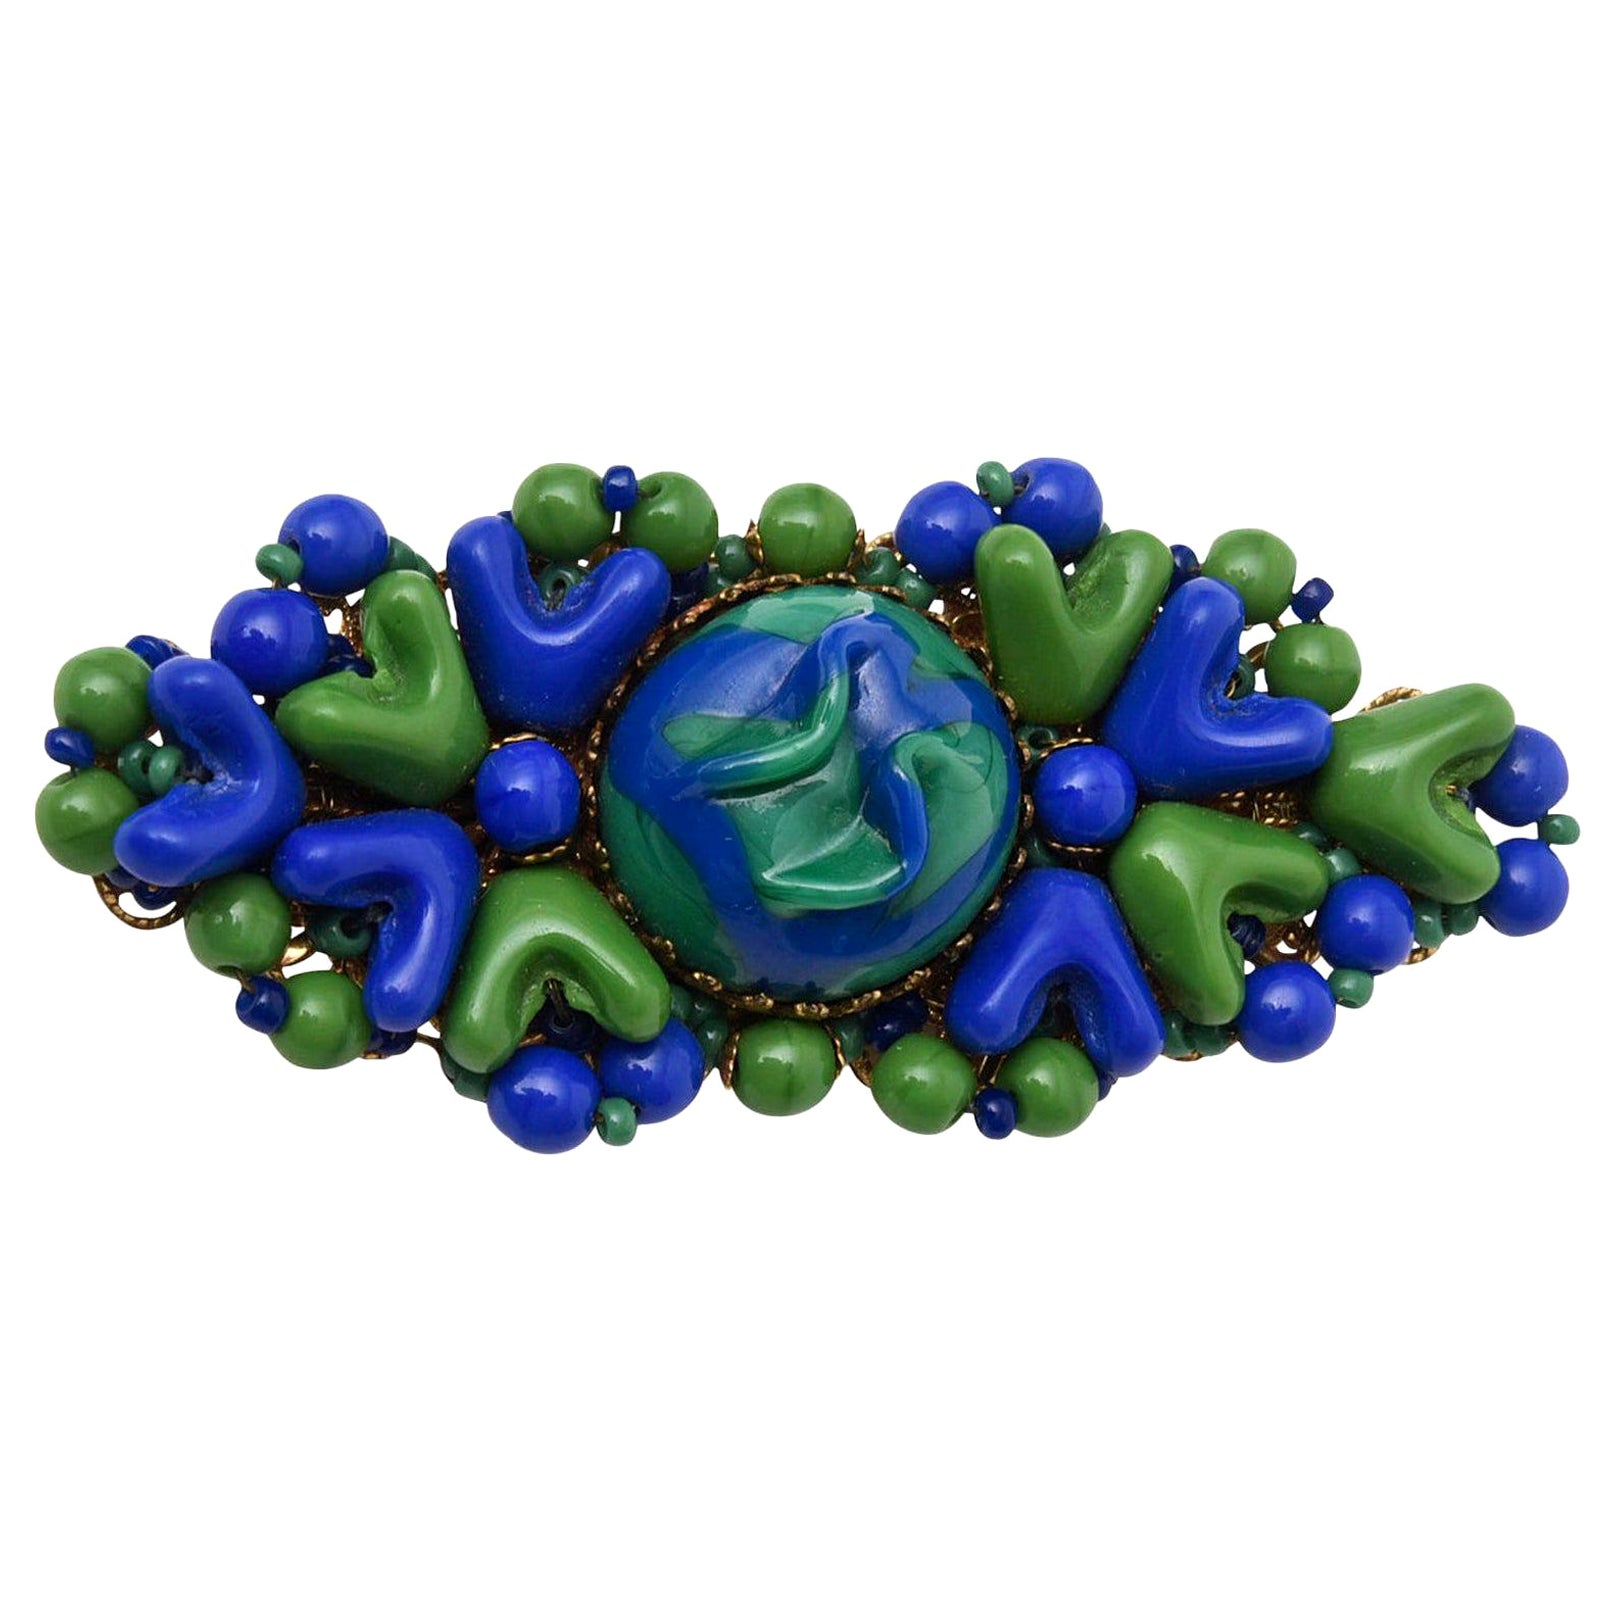  MIriam Haskell Abstract Resin Royal Blue and Green Bead Brooch Pin Vintage For Sale